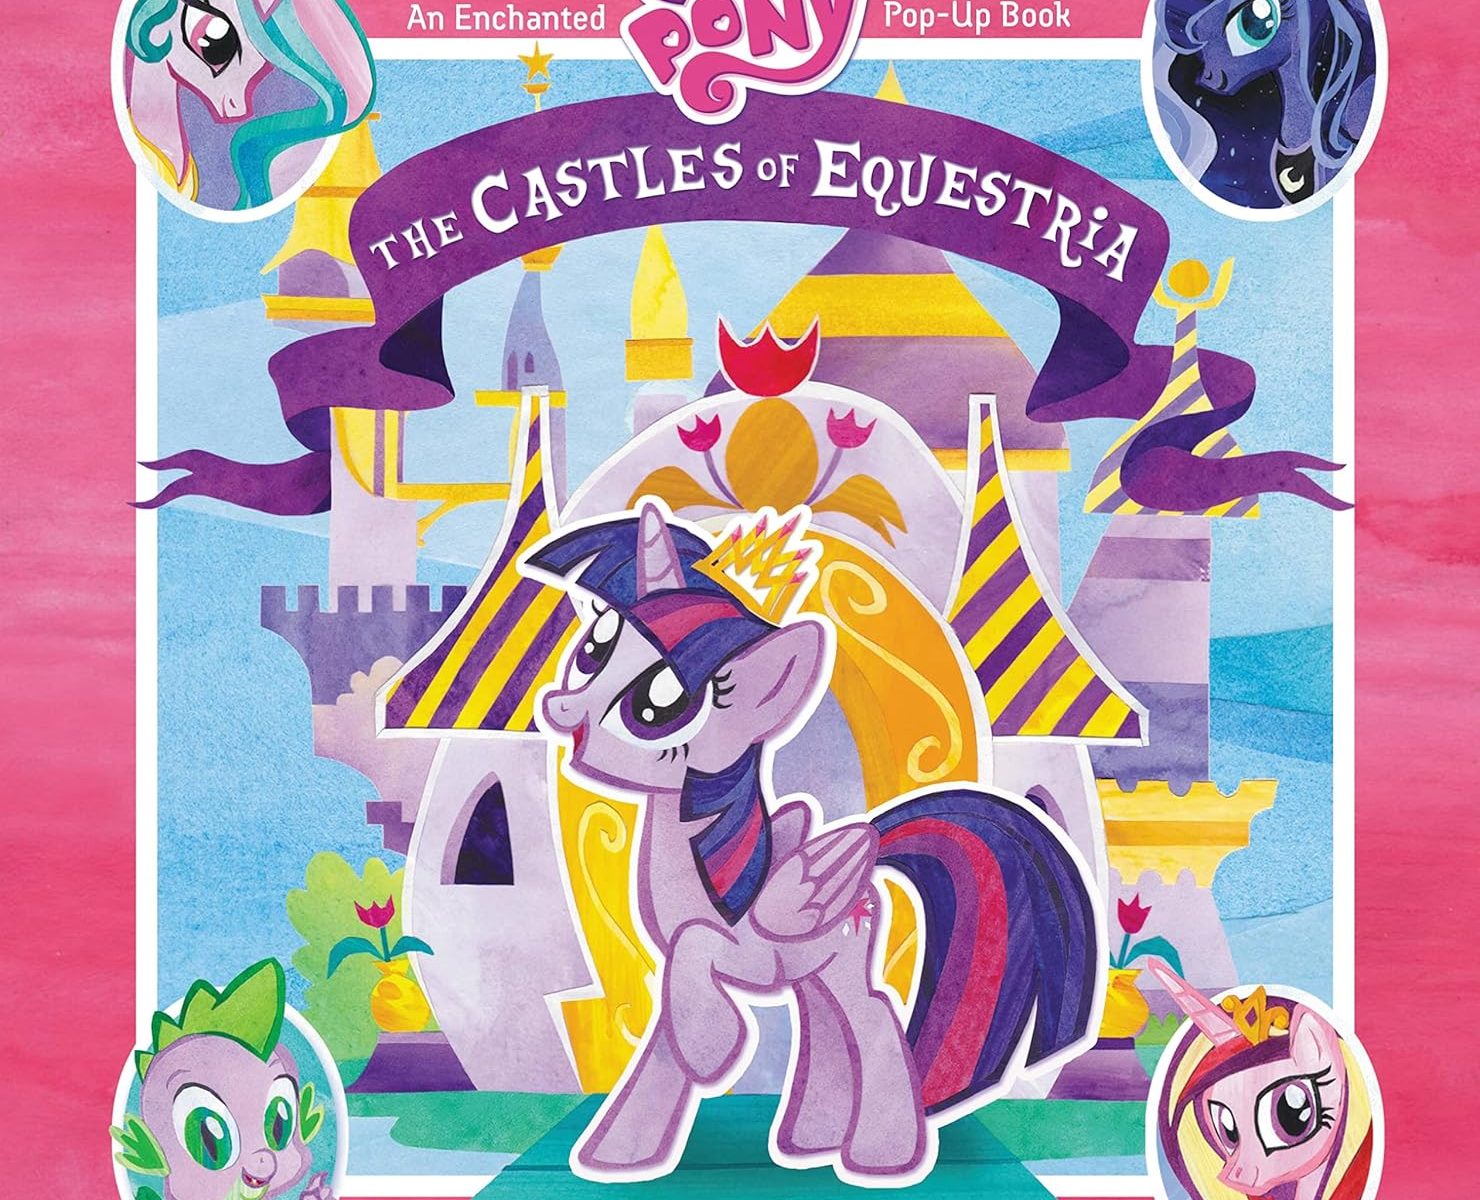 MLP The Castles of Equestria: An Enchanted Pop-Up Book